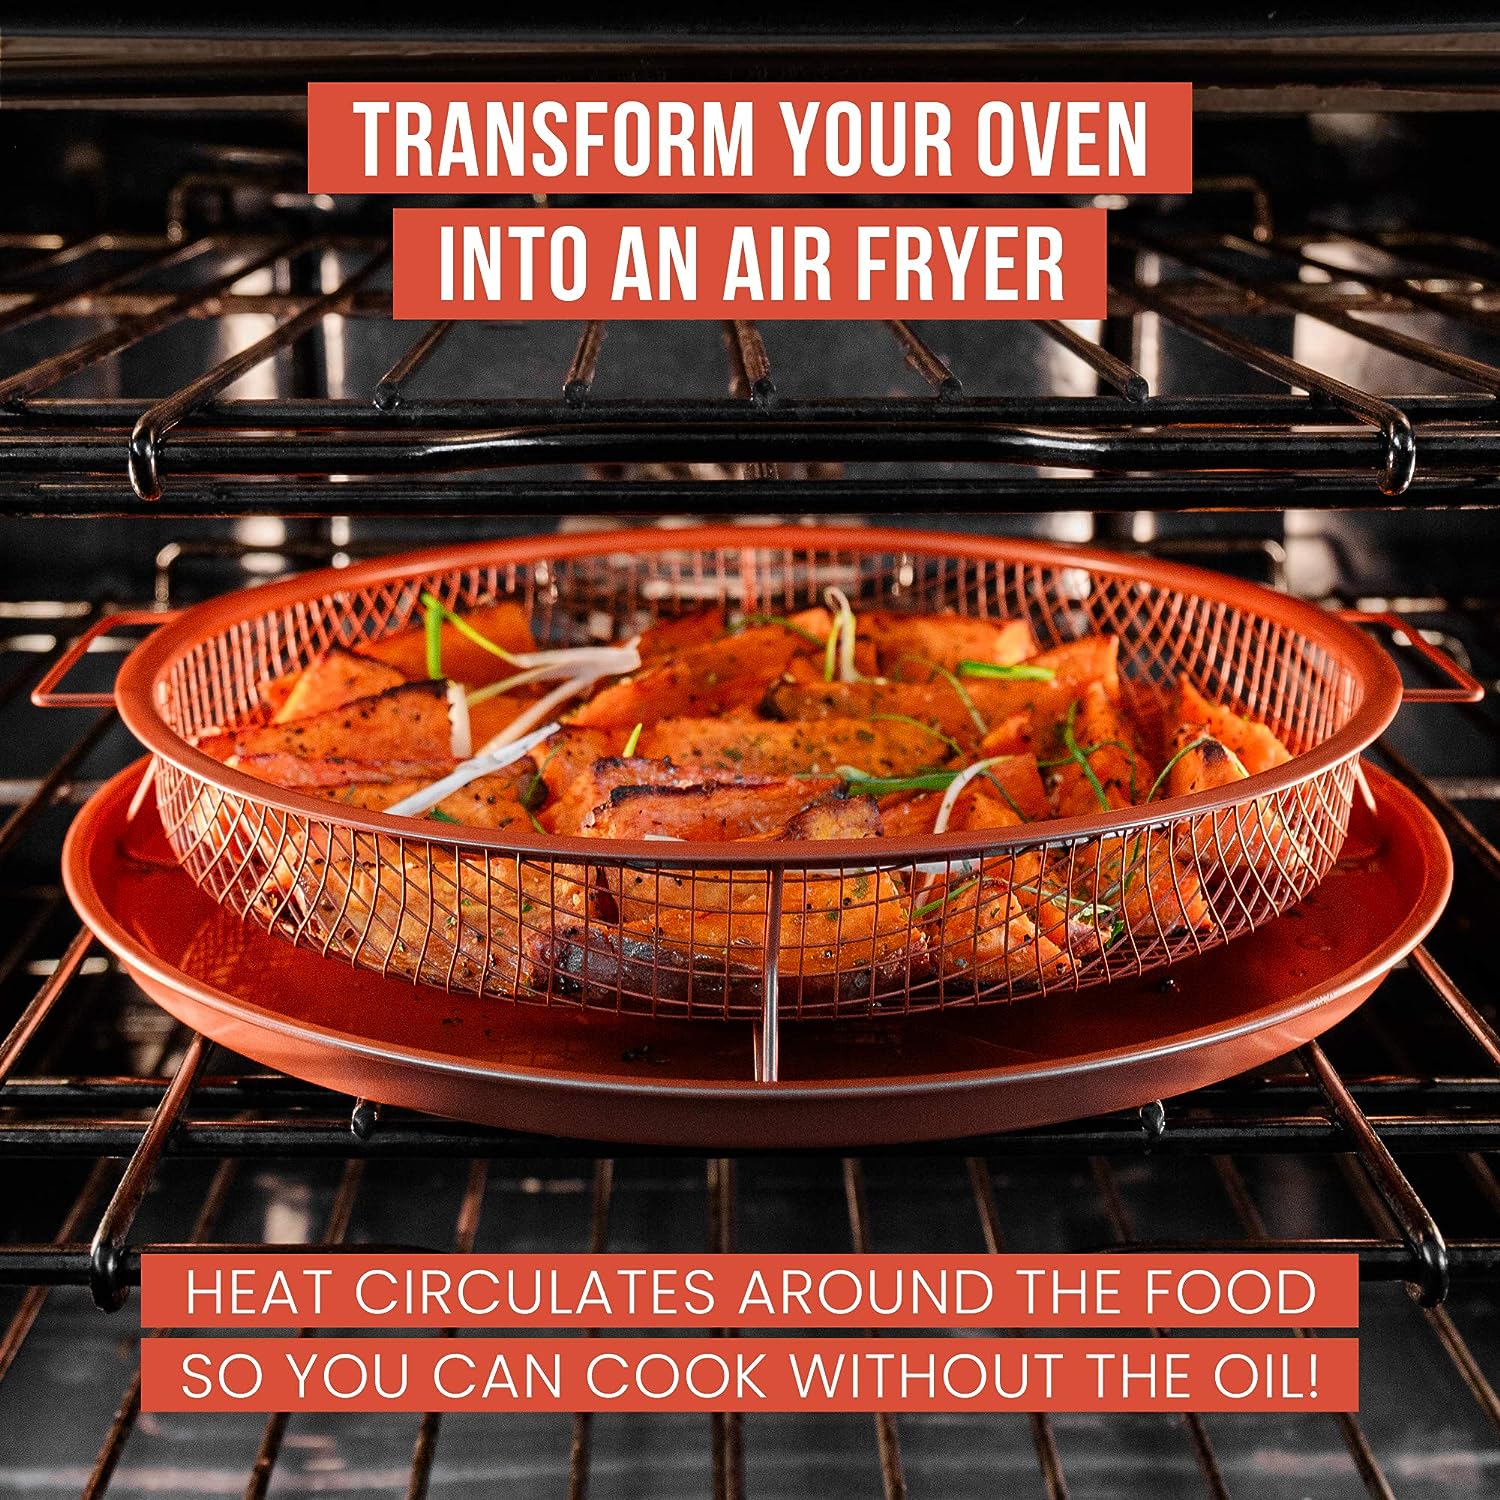 Air Fryer Basket for Oven,Stainless Steel Crisper Tray and Pan, Deluxe Air  Fry in Your Oven, Baking Pan Perfect for the Grill